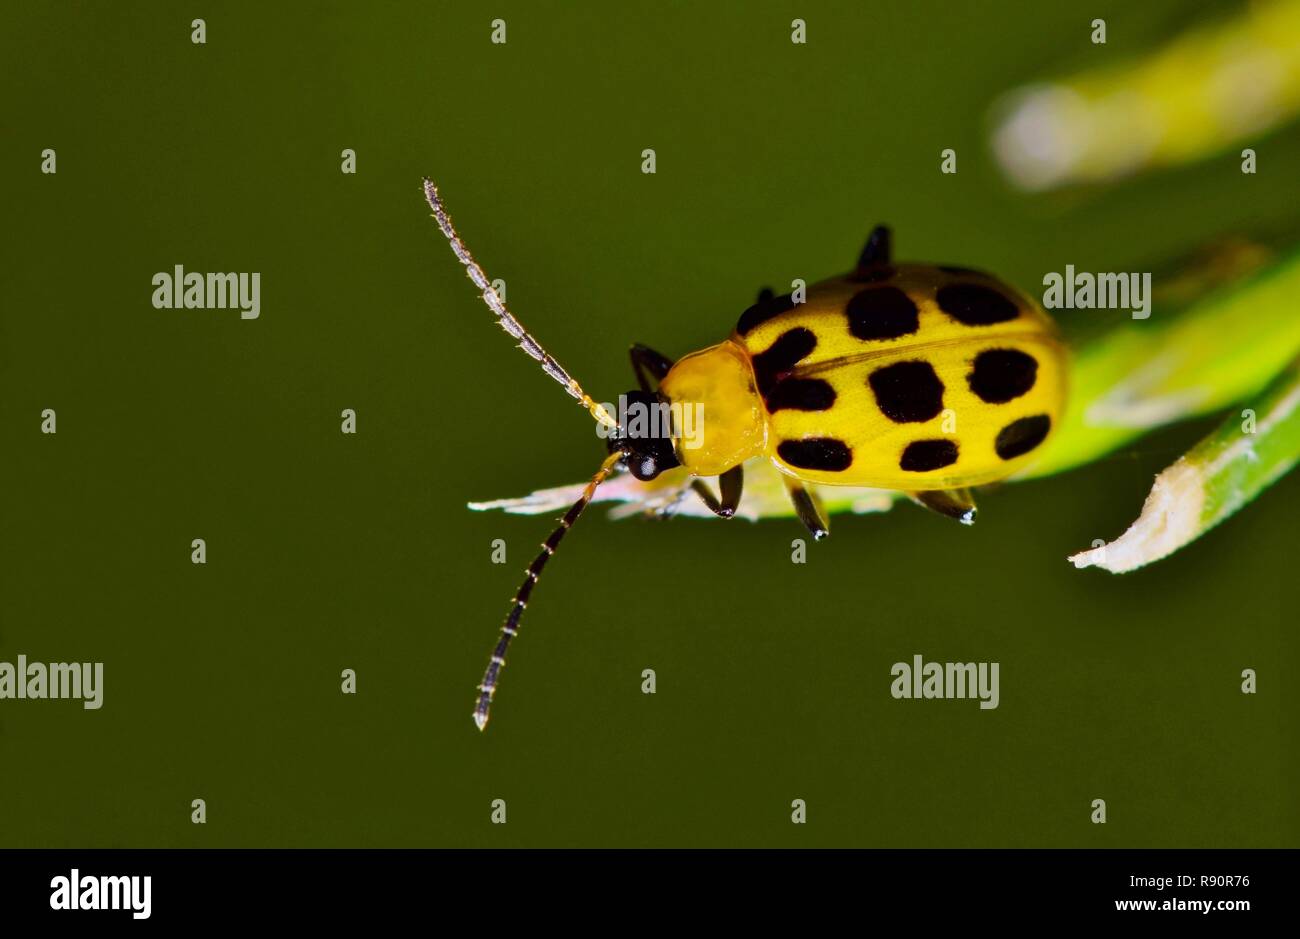 A Spotted Cucumber Beetle (Diabrotica undecimpunctata) on pine needles from an overhead view. Stock Photo